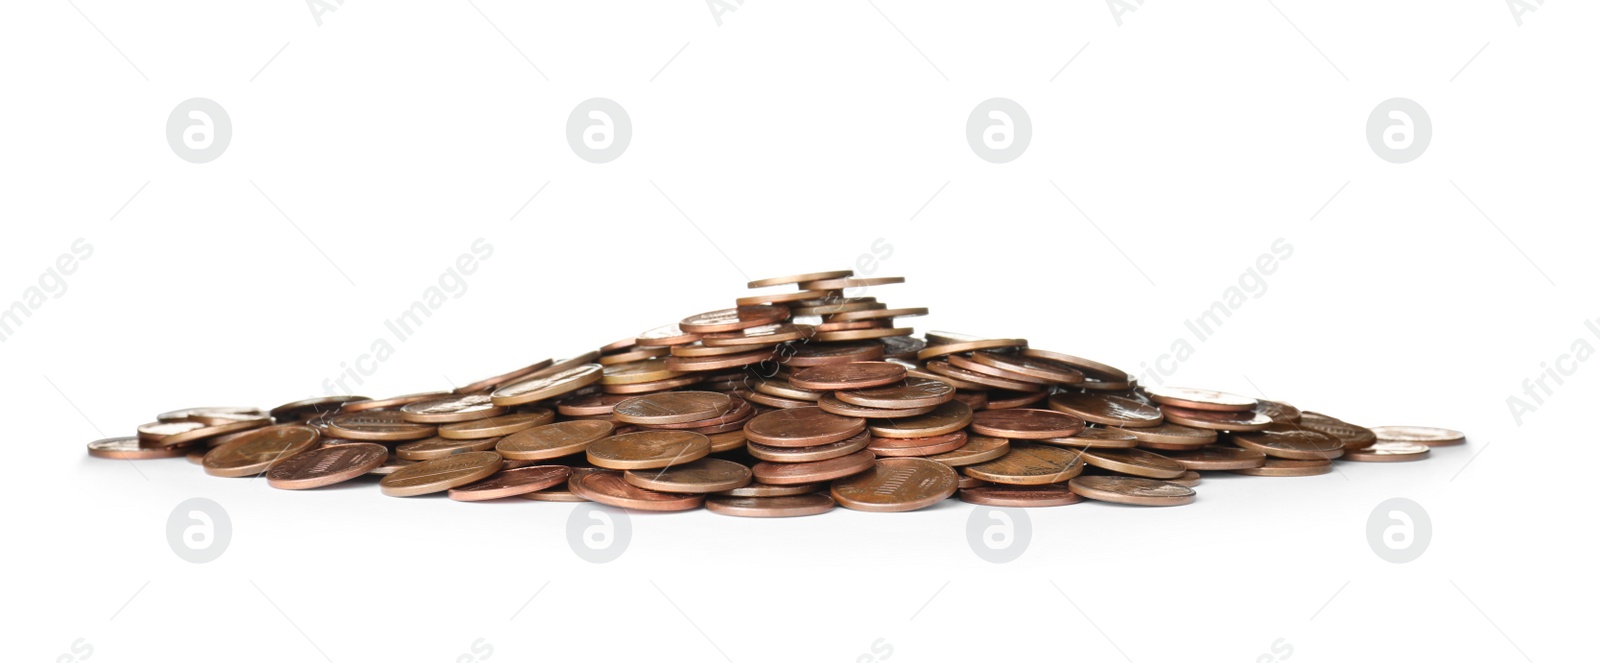 Photo of Pile of US coins isolated on white